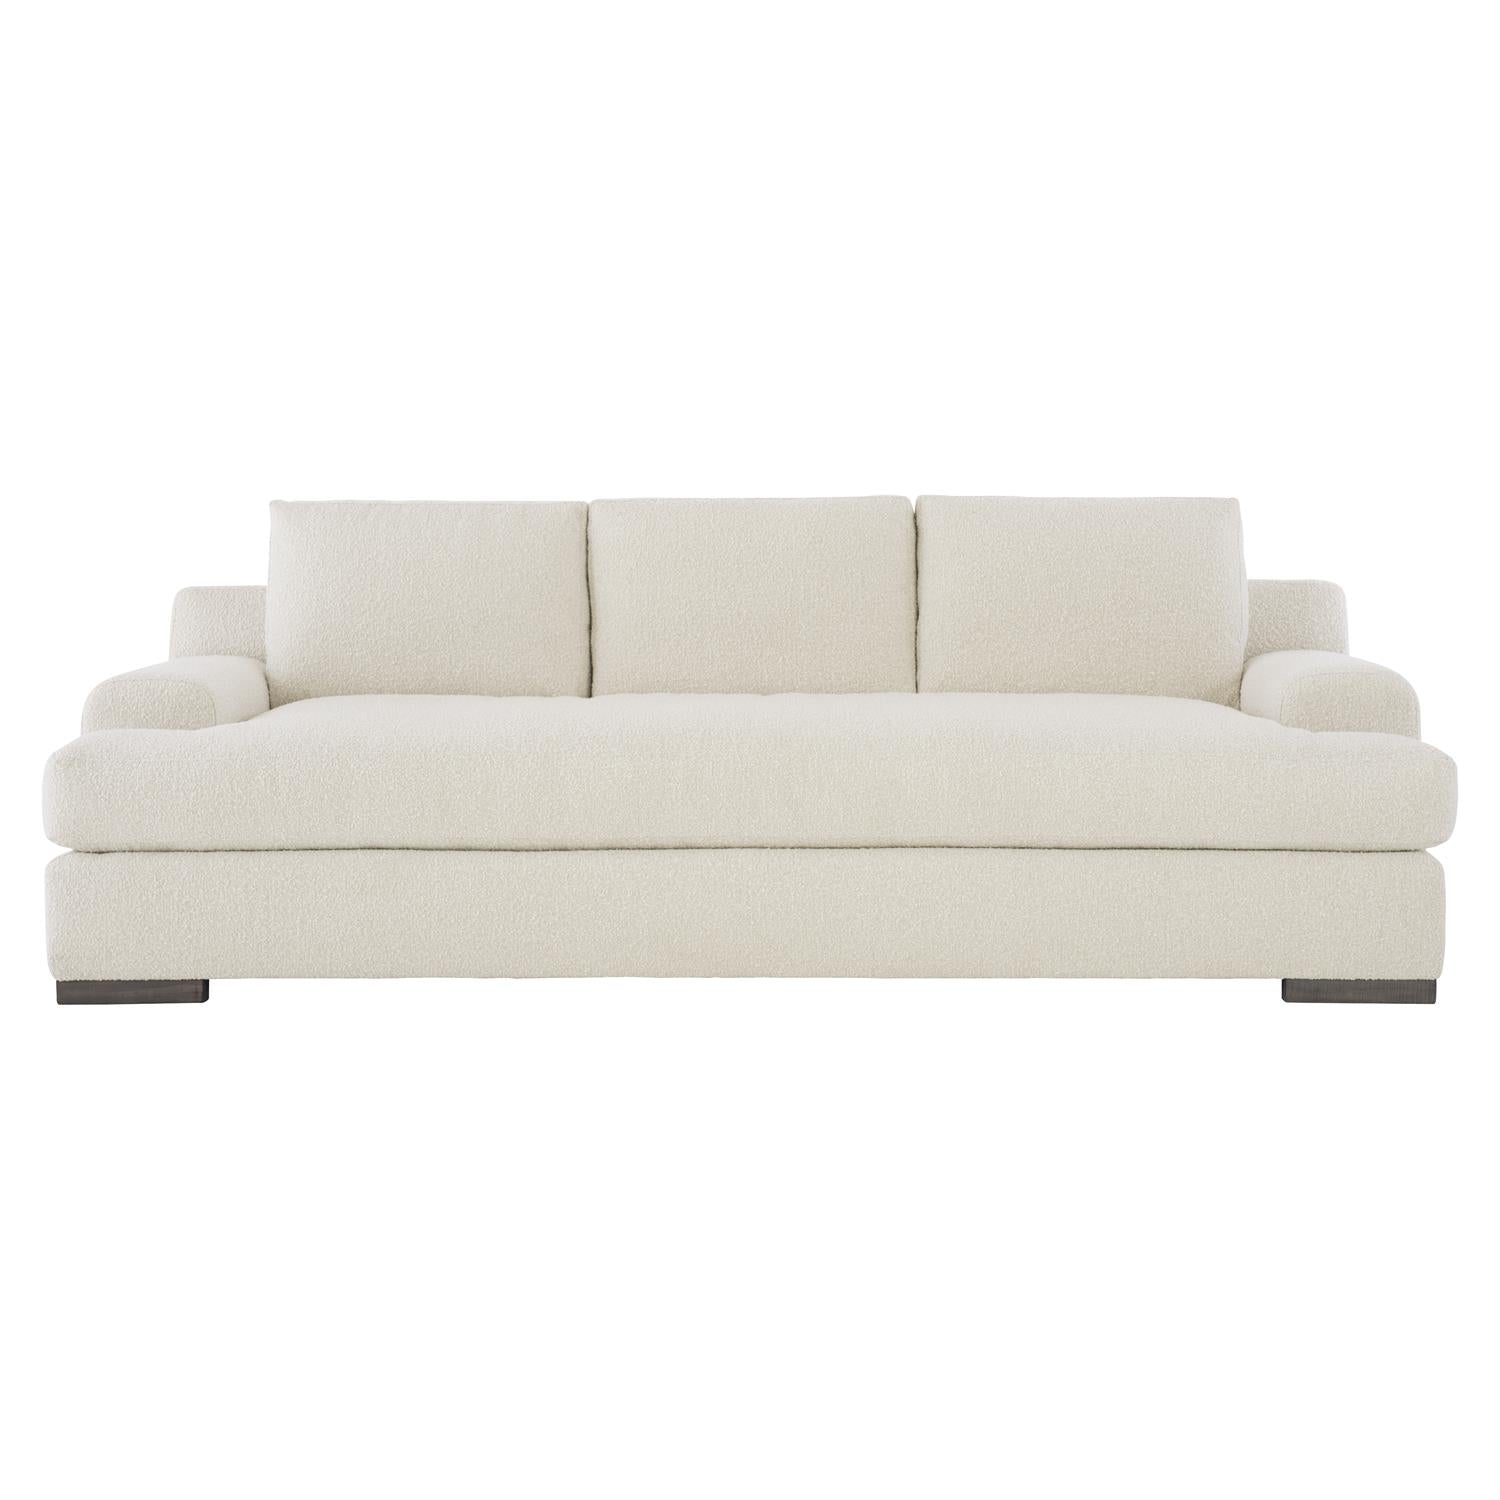 Bernhardt, Andie Leather Sofa Without Pillows